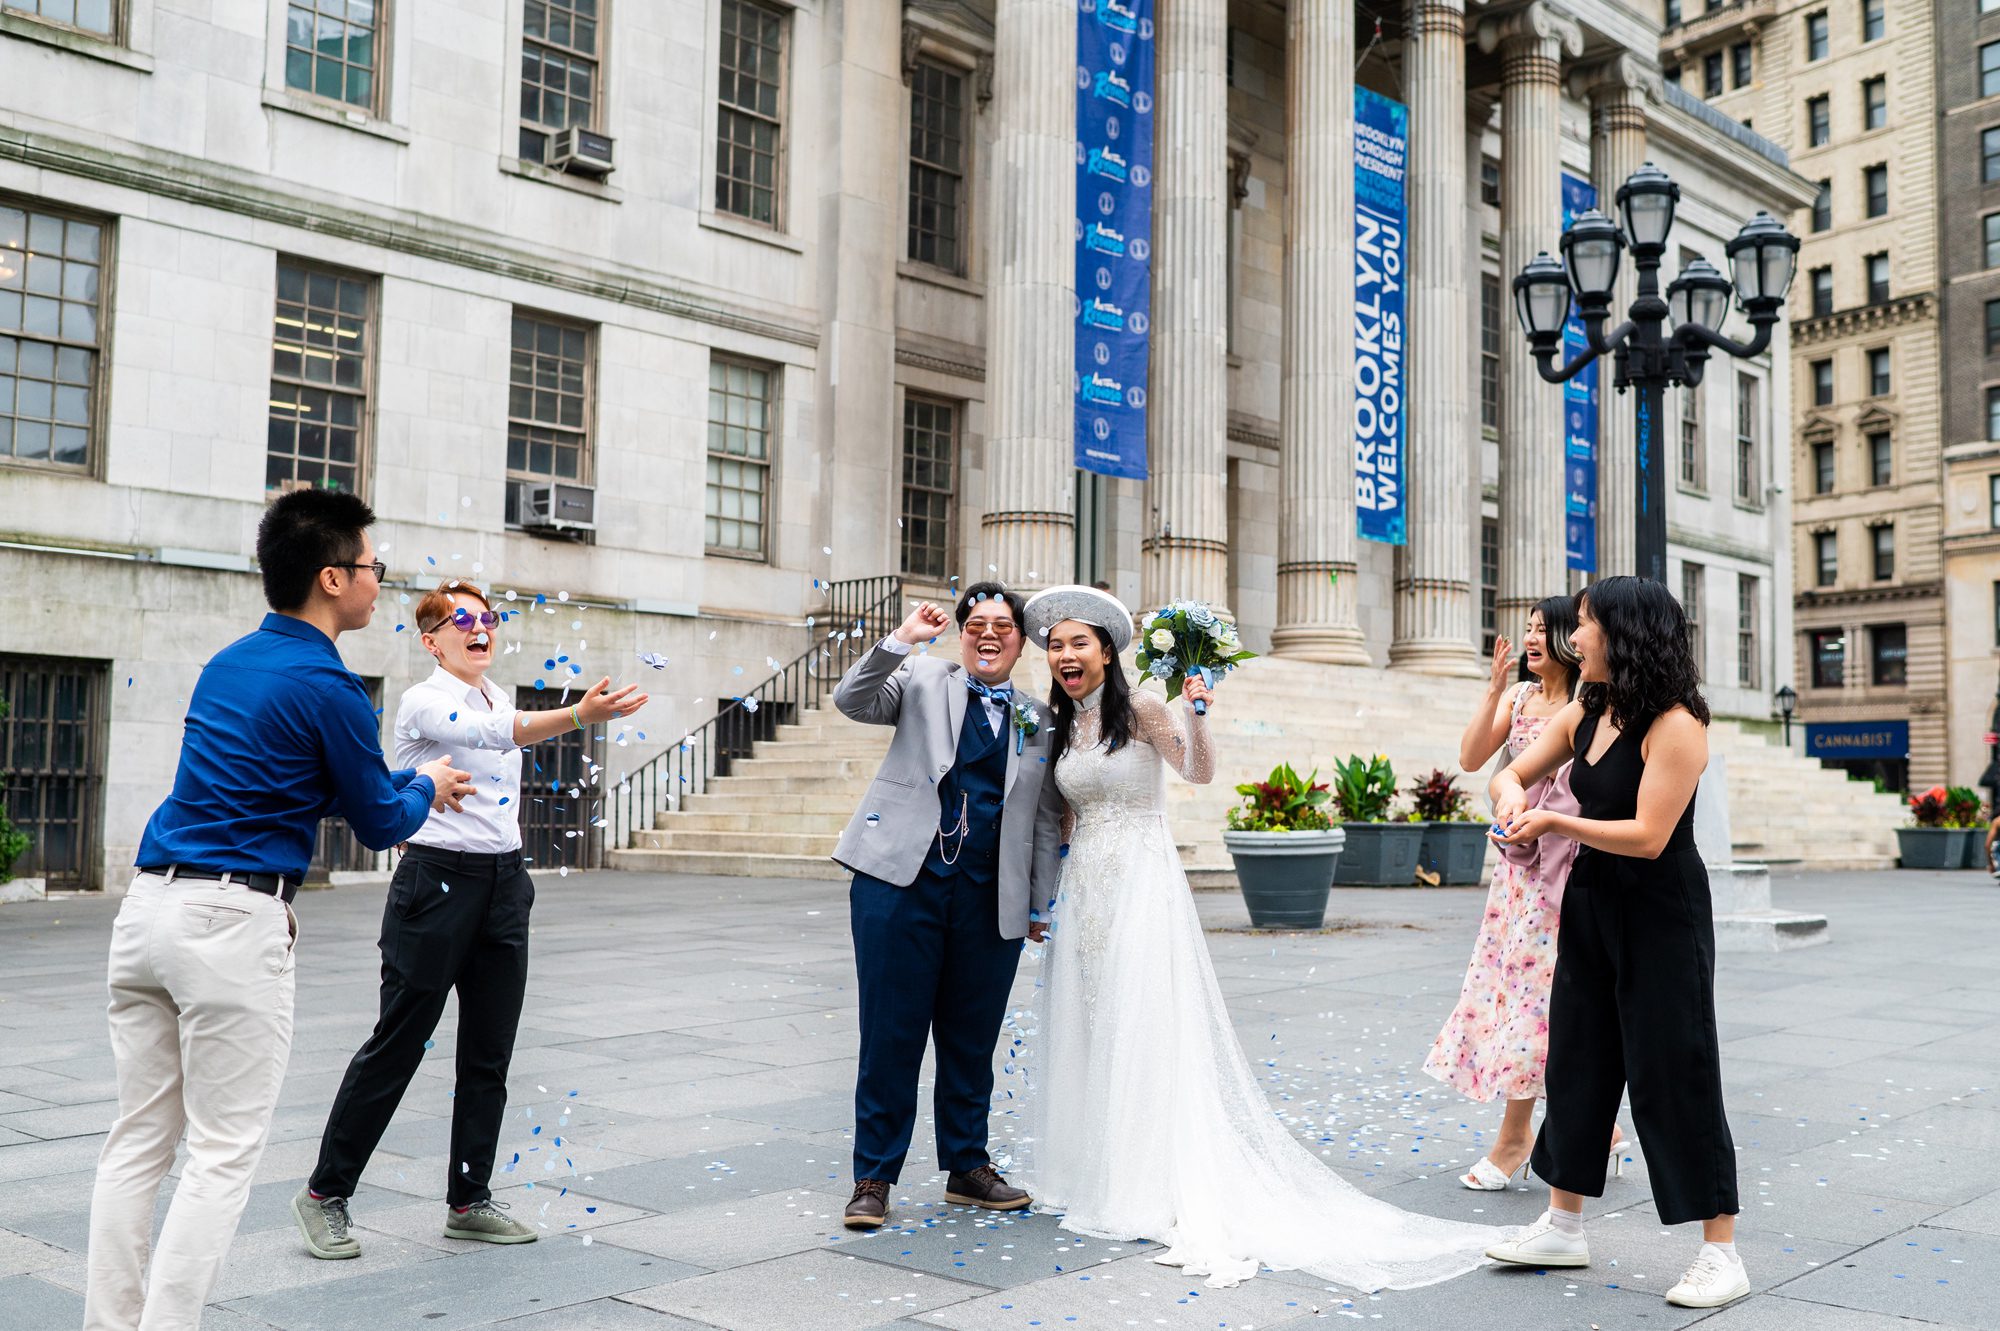 A couple cheering after getting married at Brooklyn City Hall